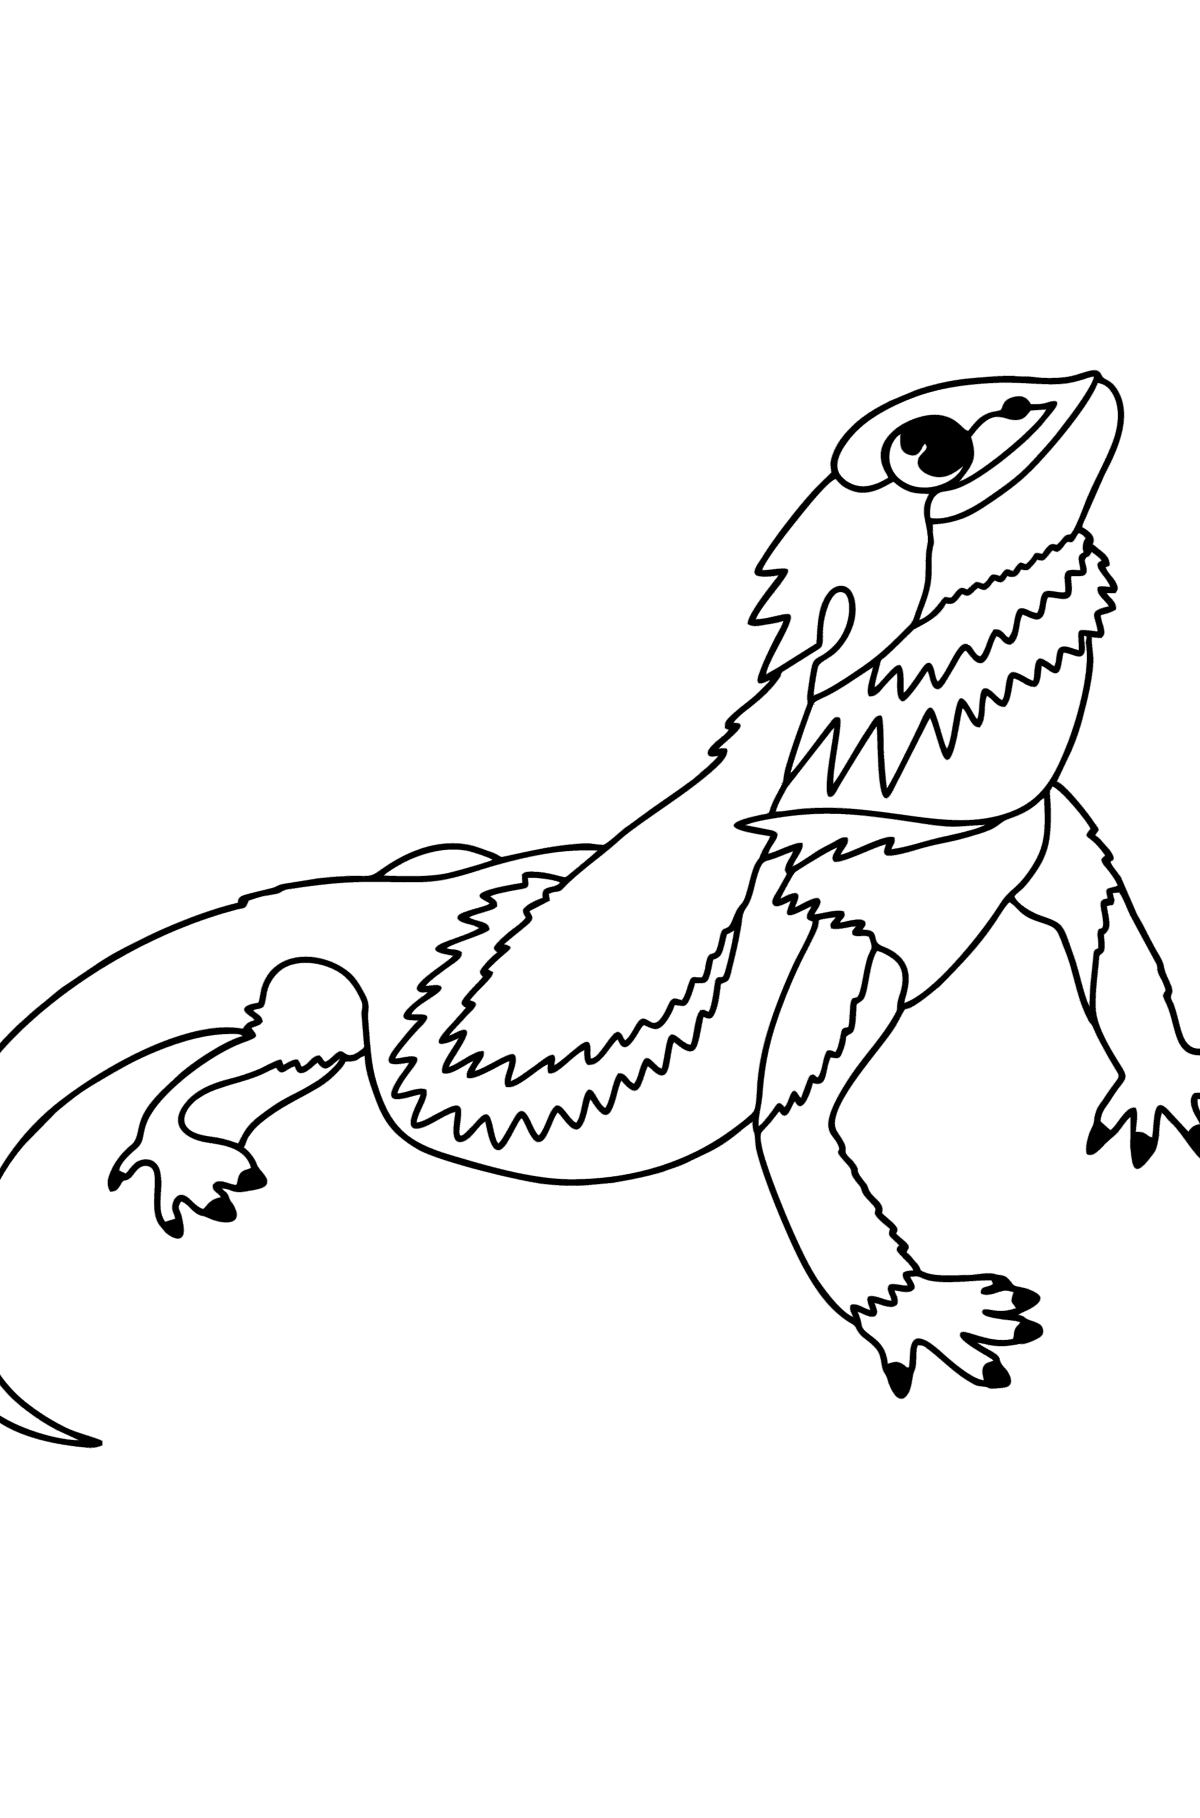 Lizard Bearded Dragon сoloring page - Coloring Pages for Kids